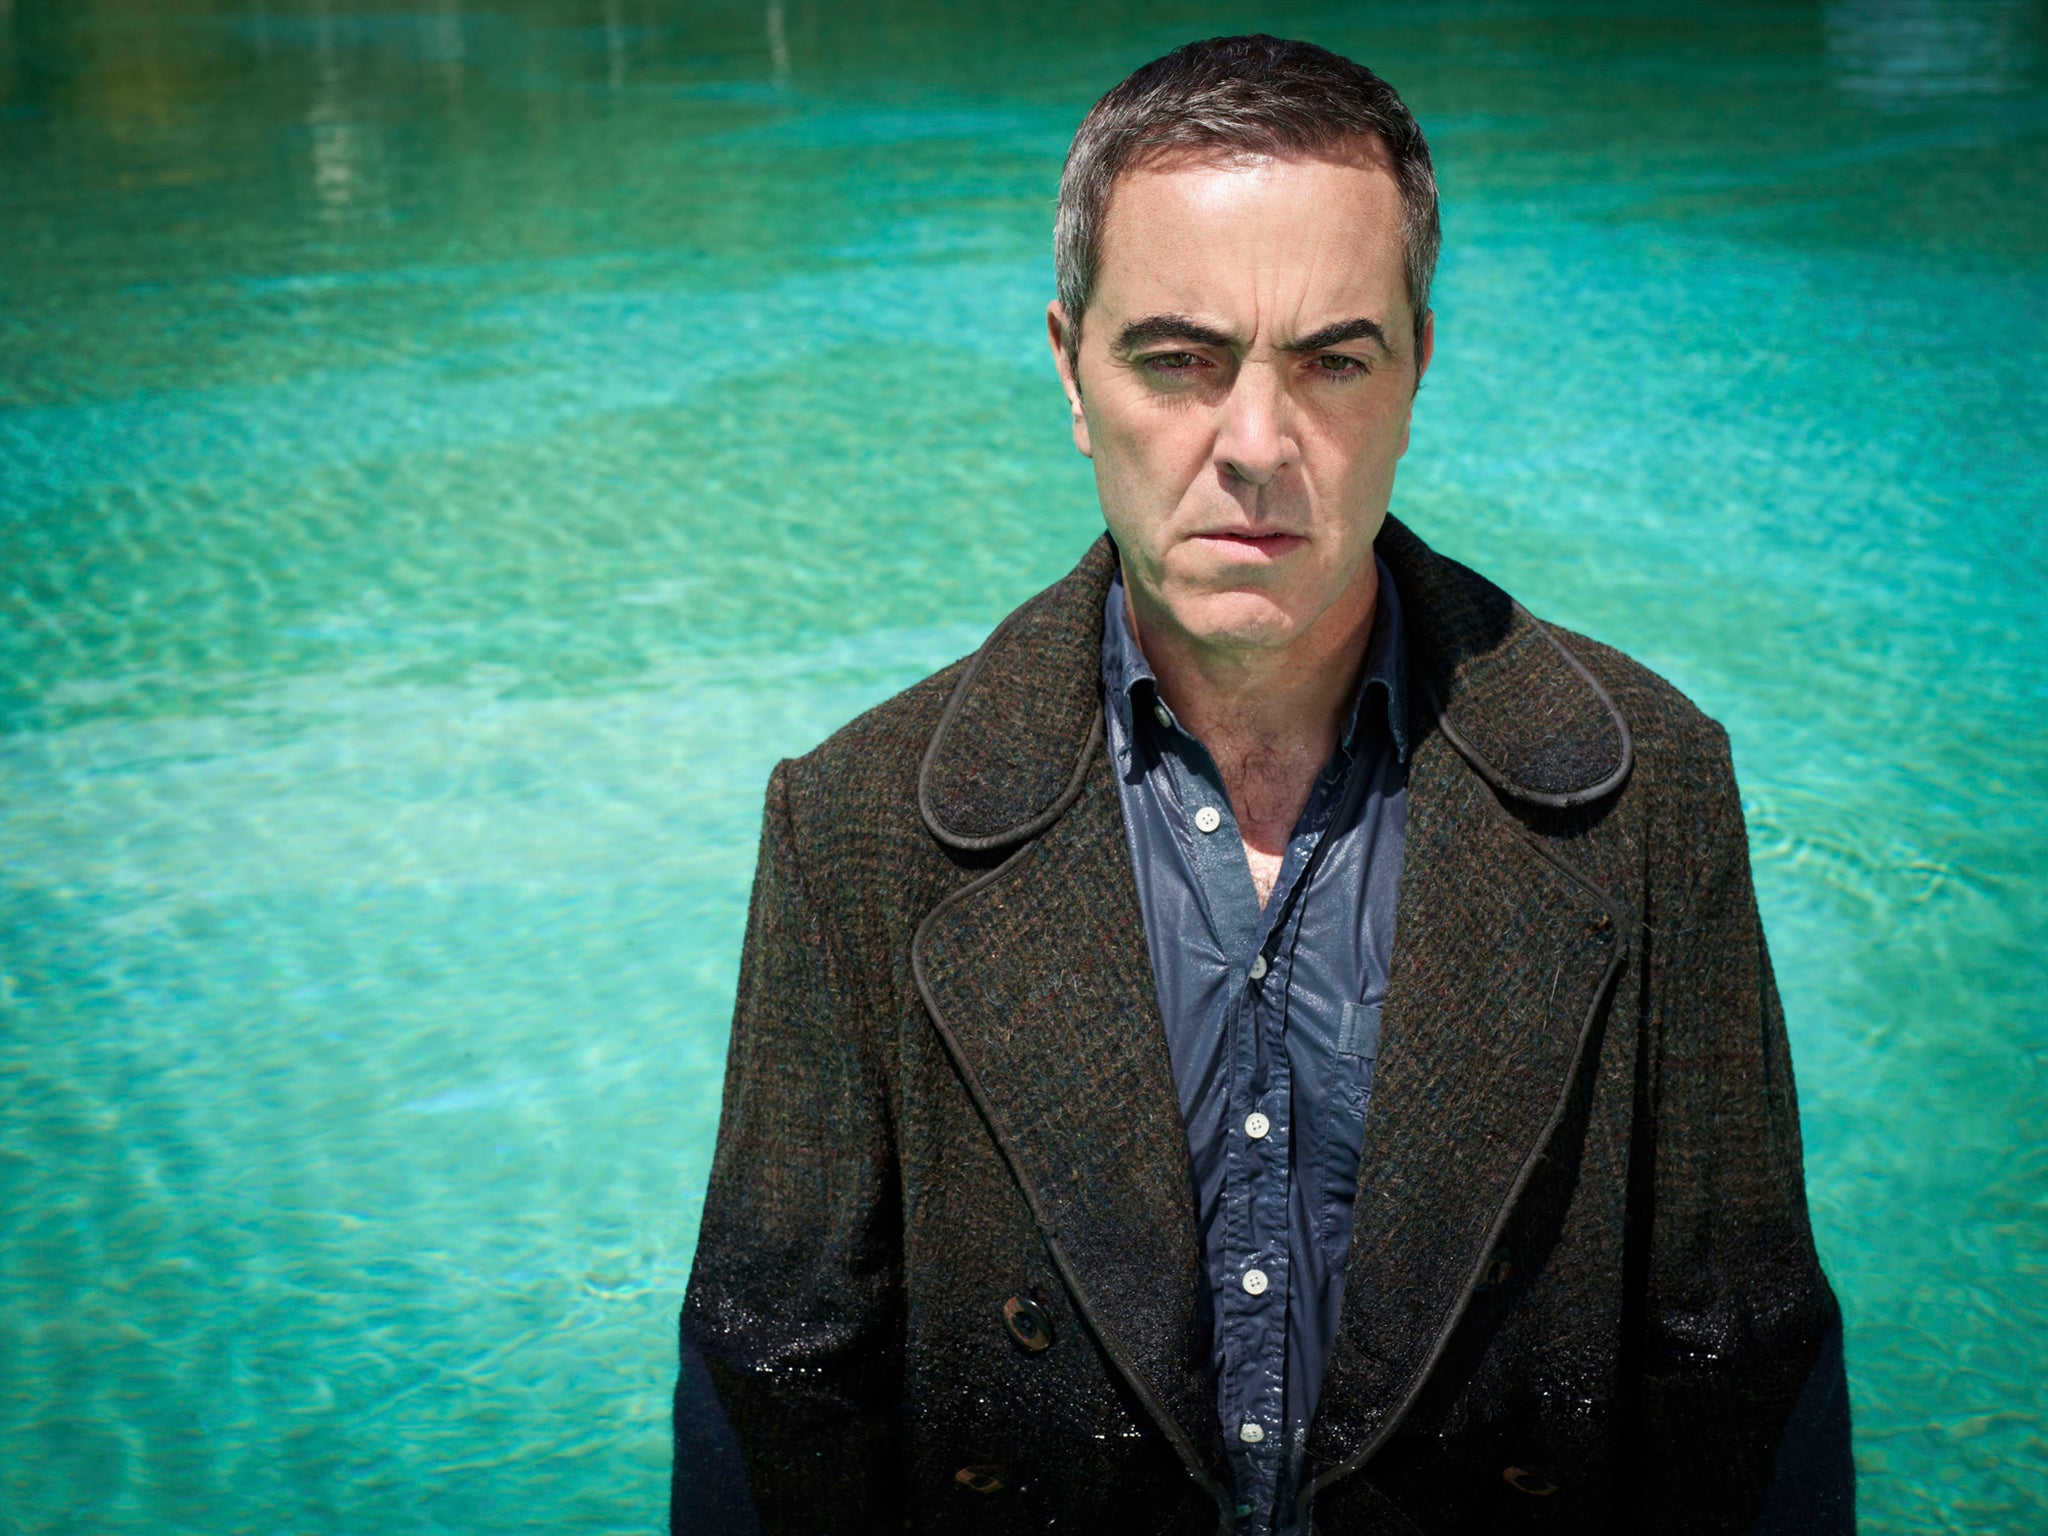 James Nesbitt plays Tony Hughes in the first series of The Missing